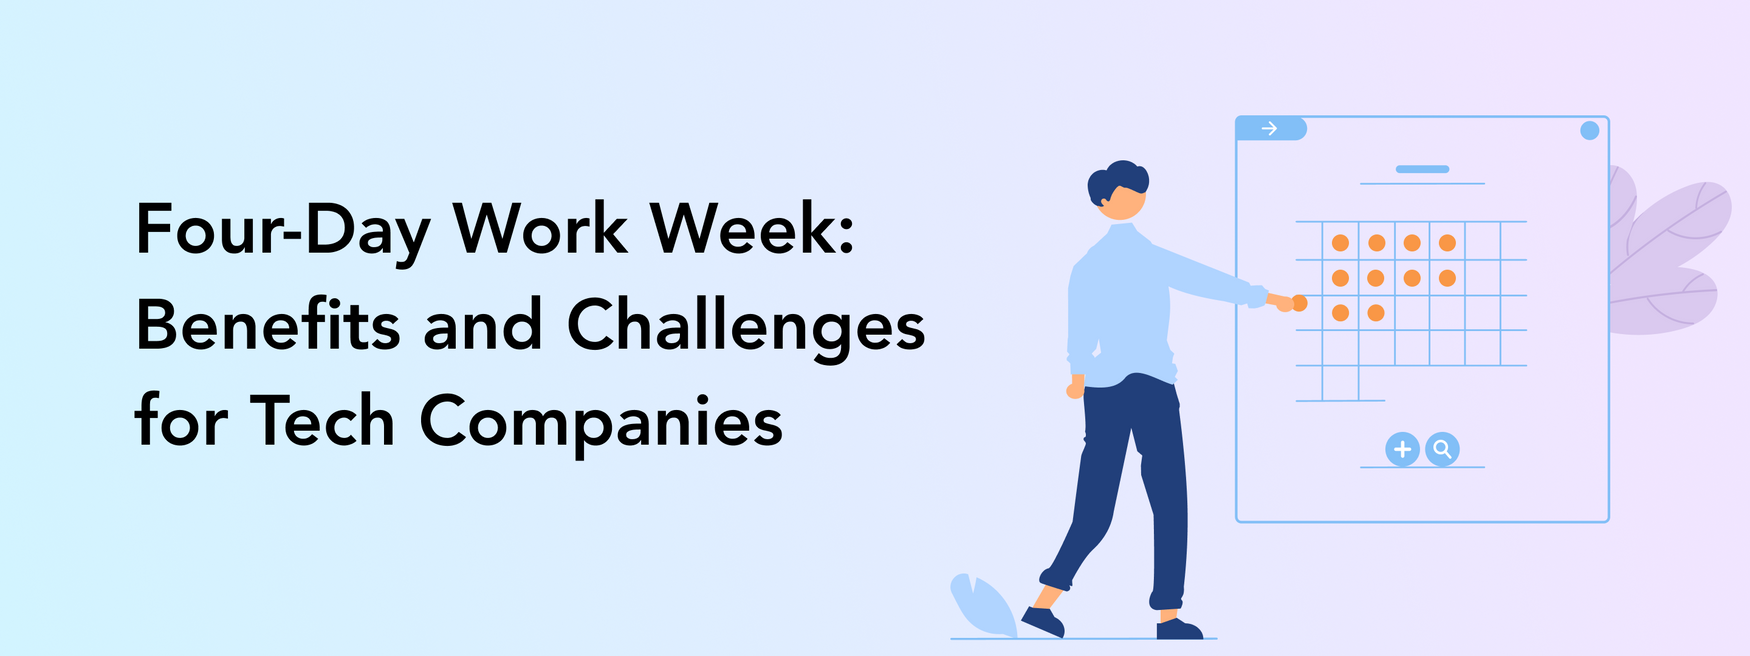 Four Day Work Week Benefits And Challenges For Tech Companies